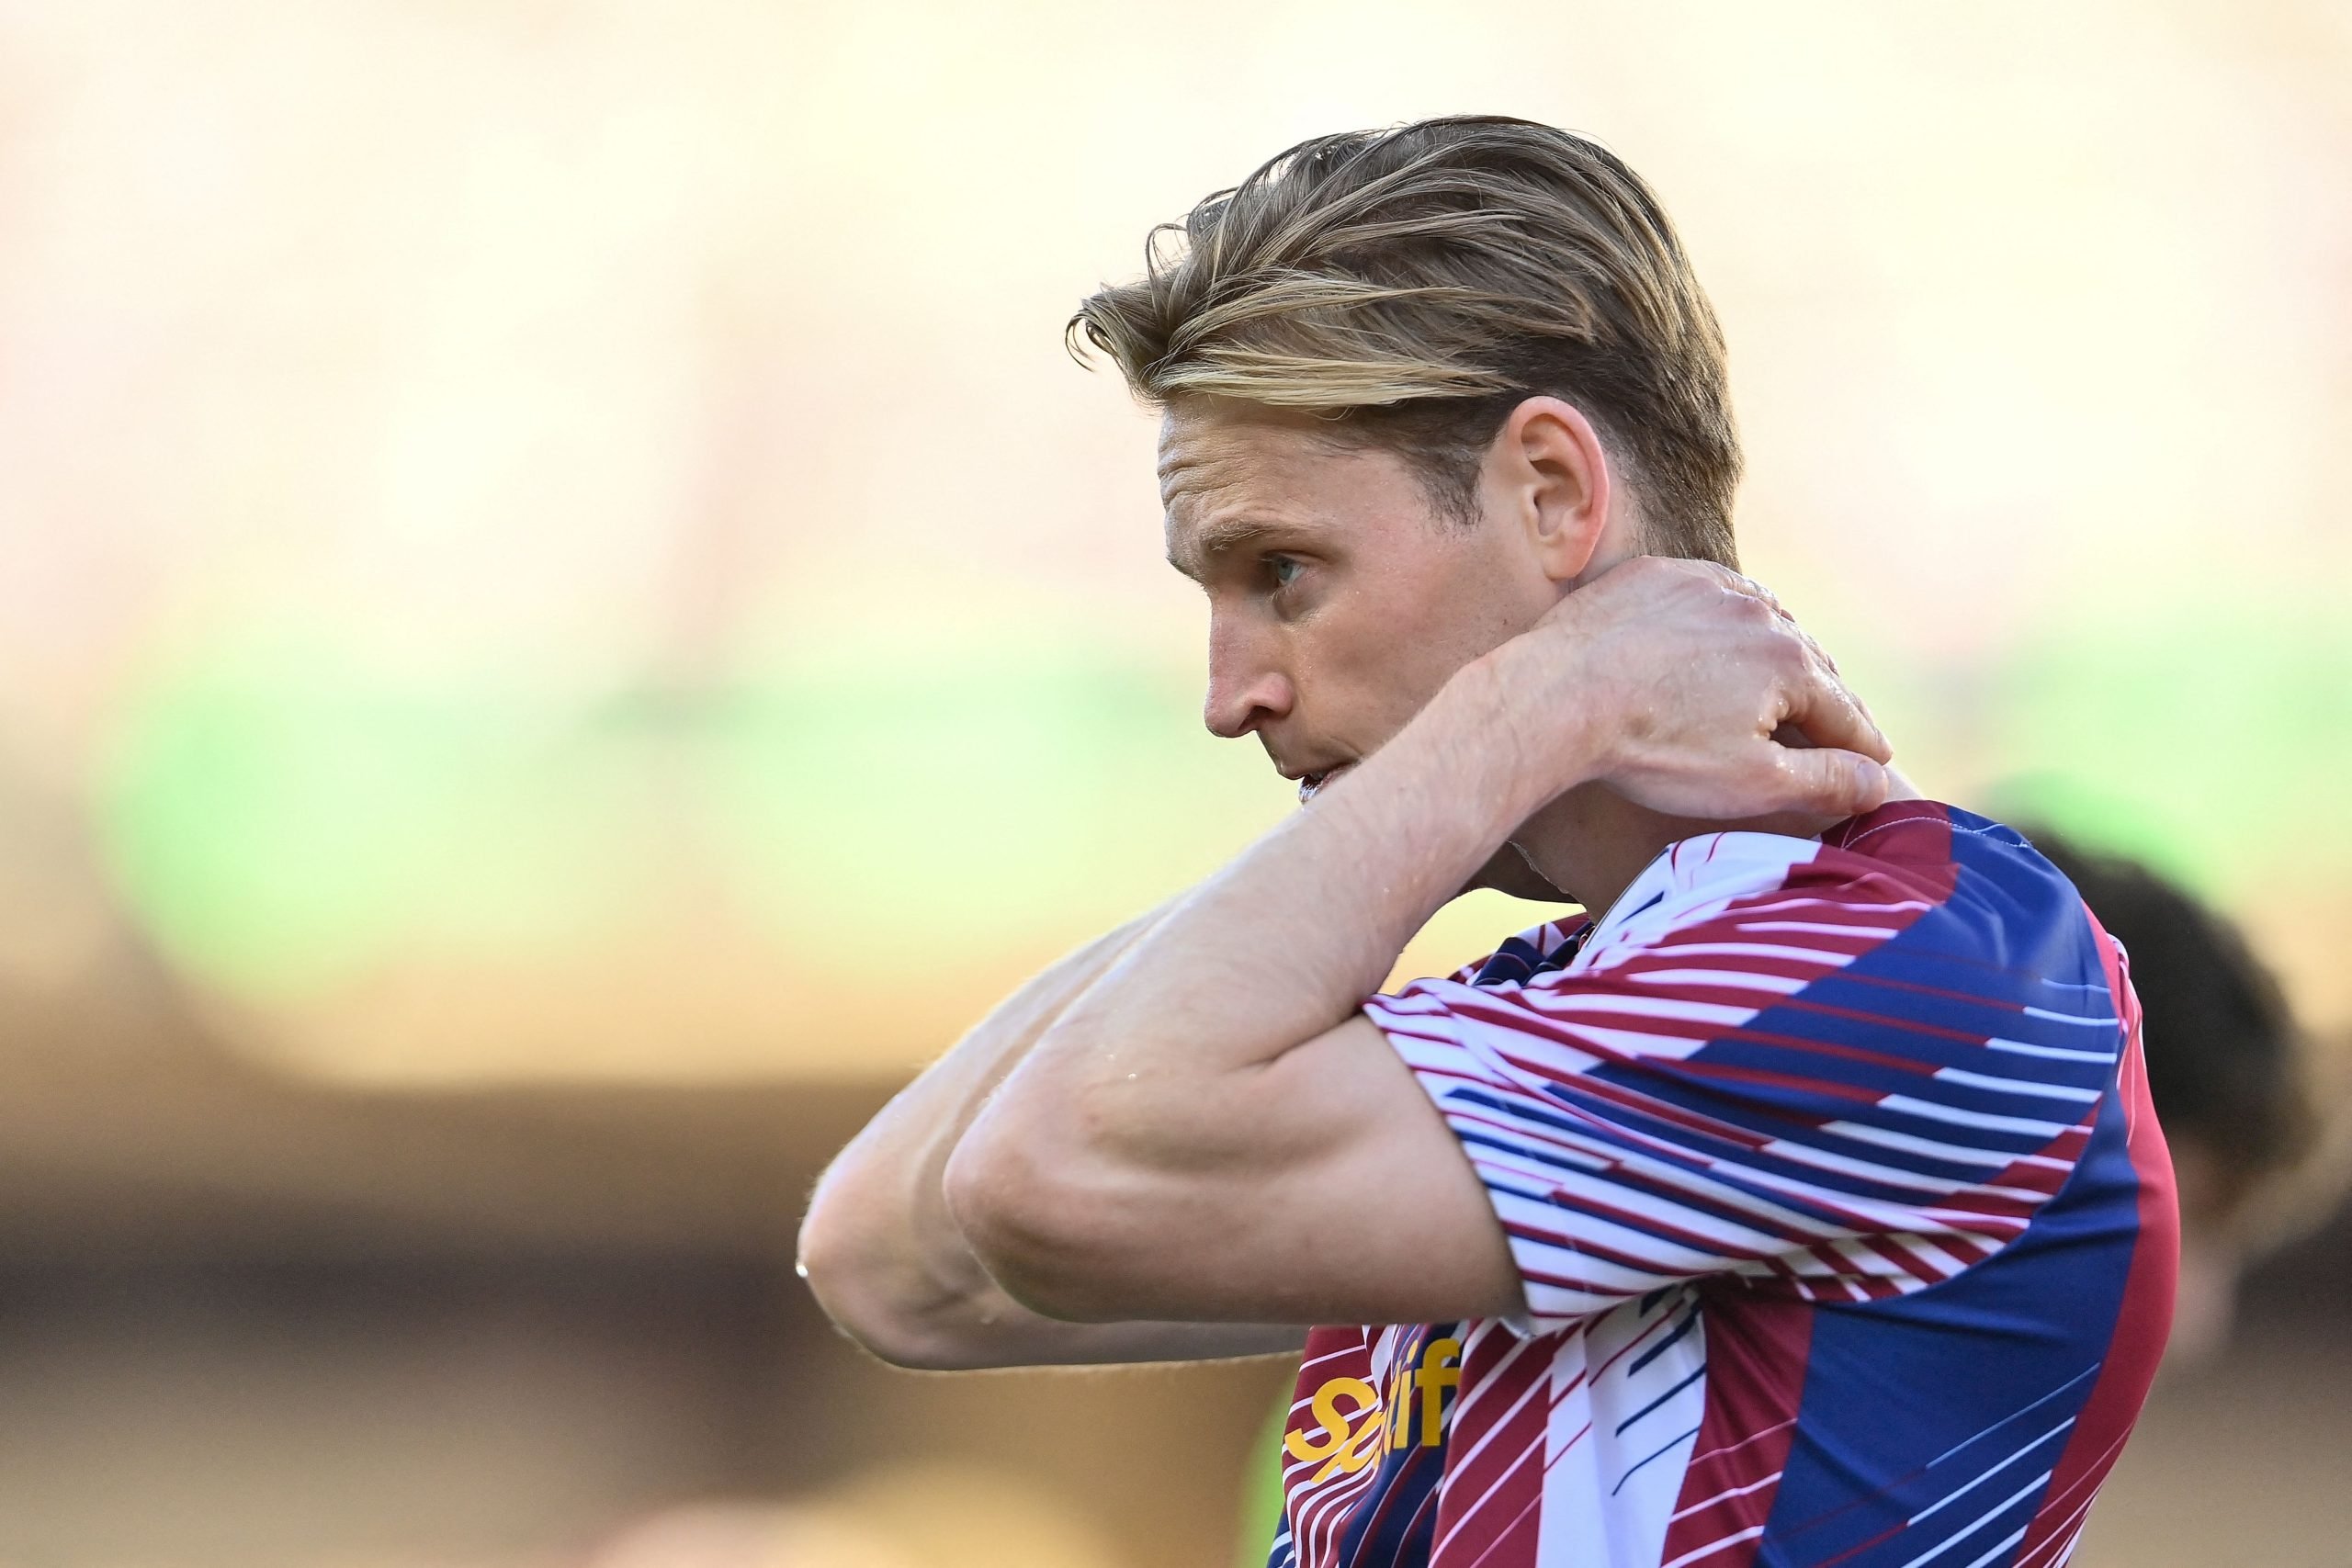 According to the Spanish newspaper Mundo Deportivo, there are several moving parts involved in Barcelona player Frenkie de Jong's involvement in the forthcoming away match against Real Sociedad.